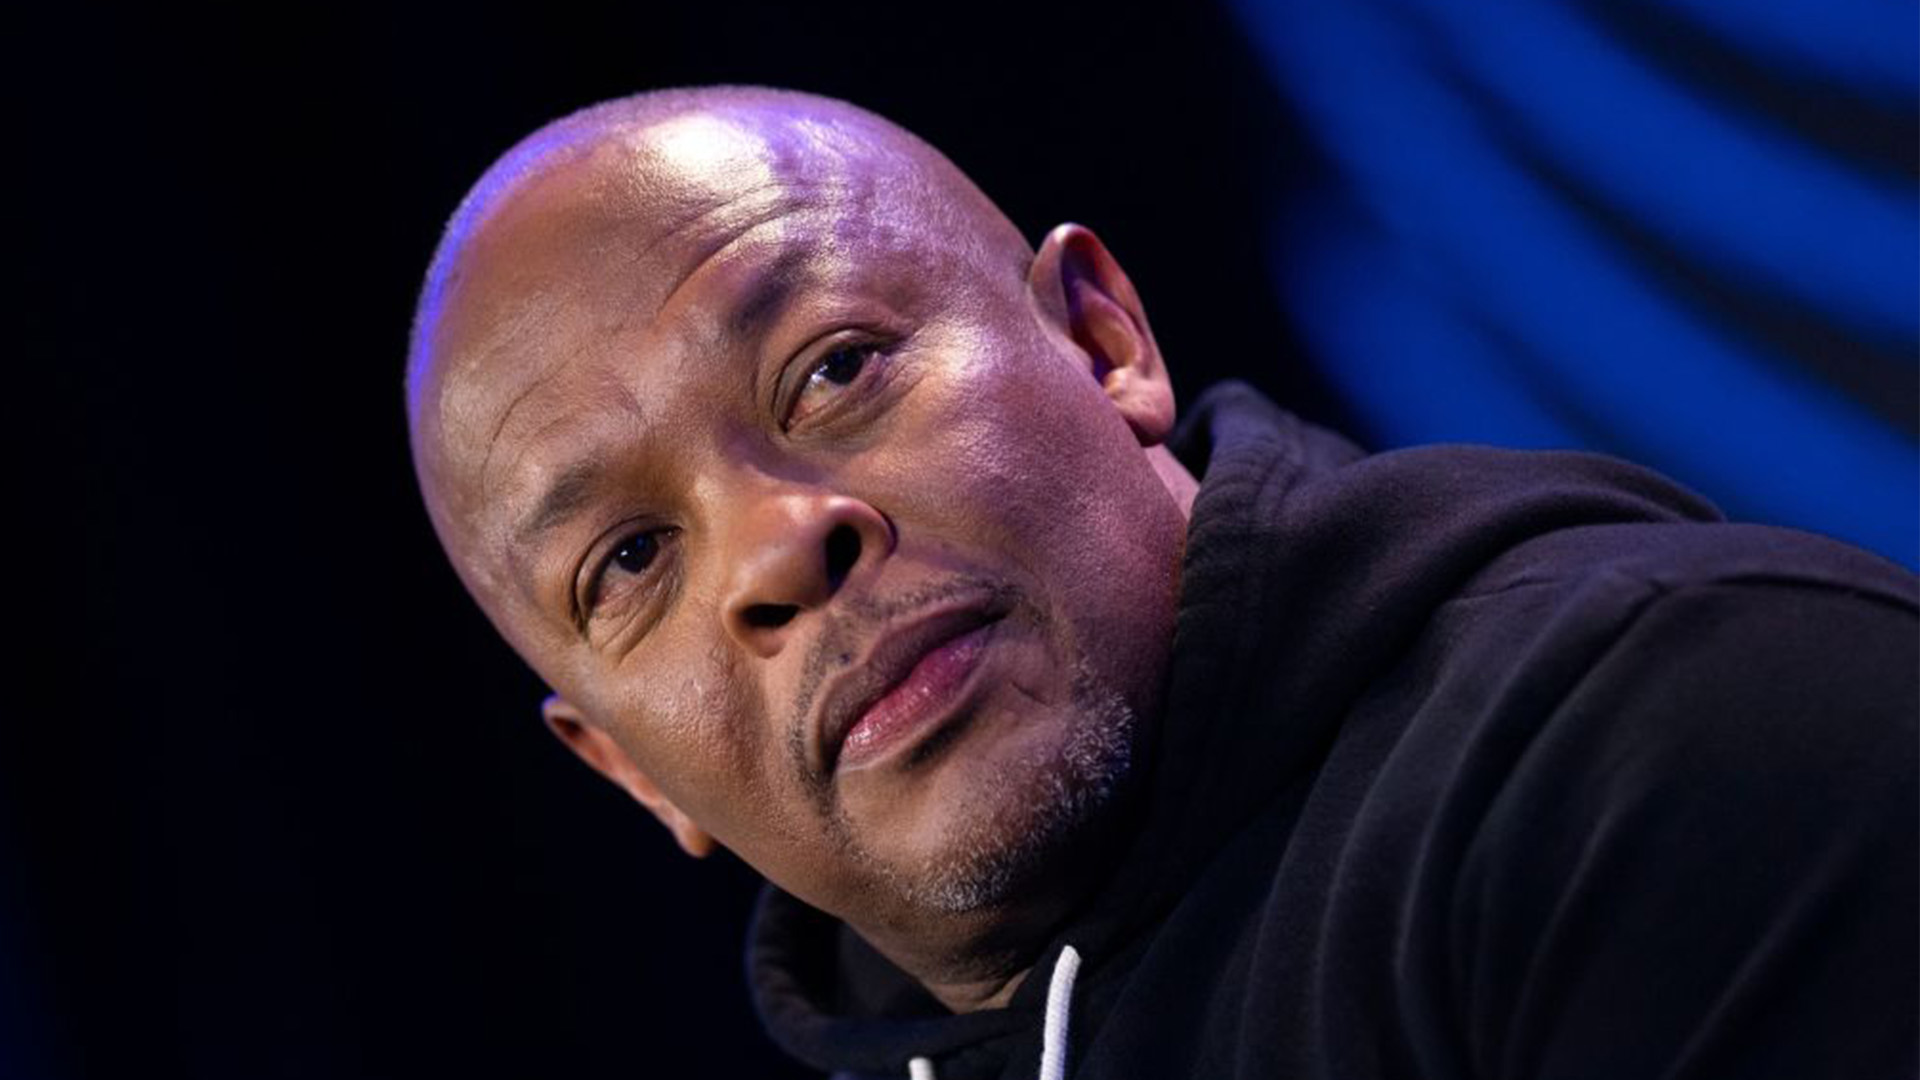 Dr. Dre To Sell Catalog Assets In A Deal Worth More Than $200M, Report Says